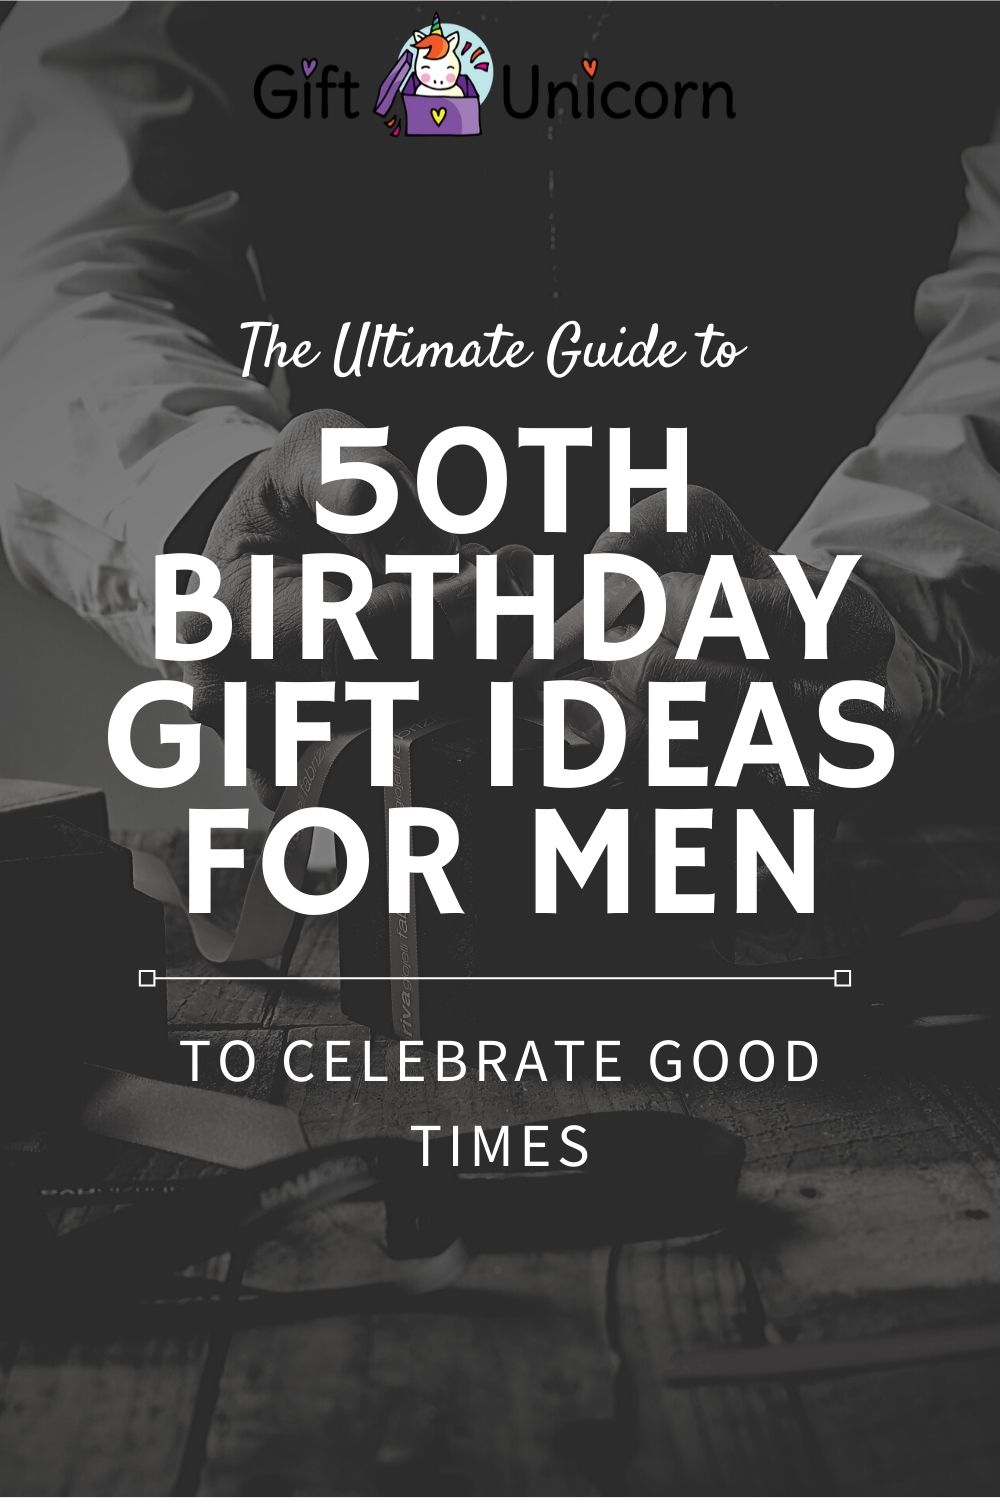 50th birthday gift ideas for men pin image